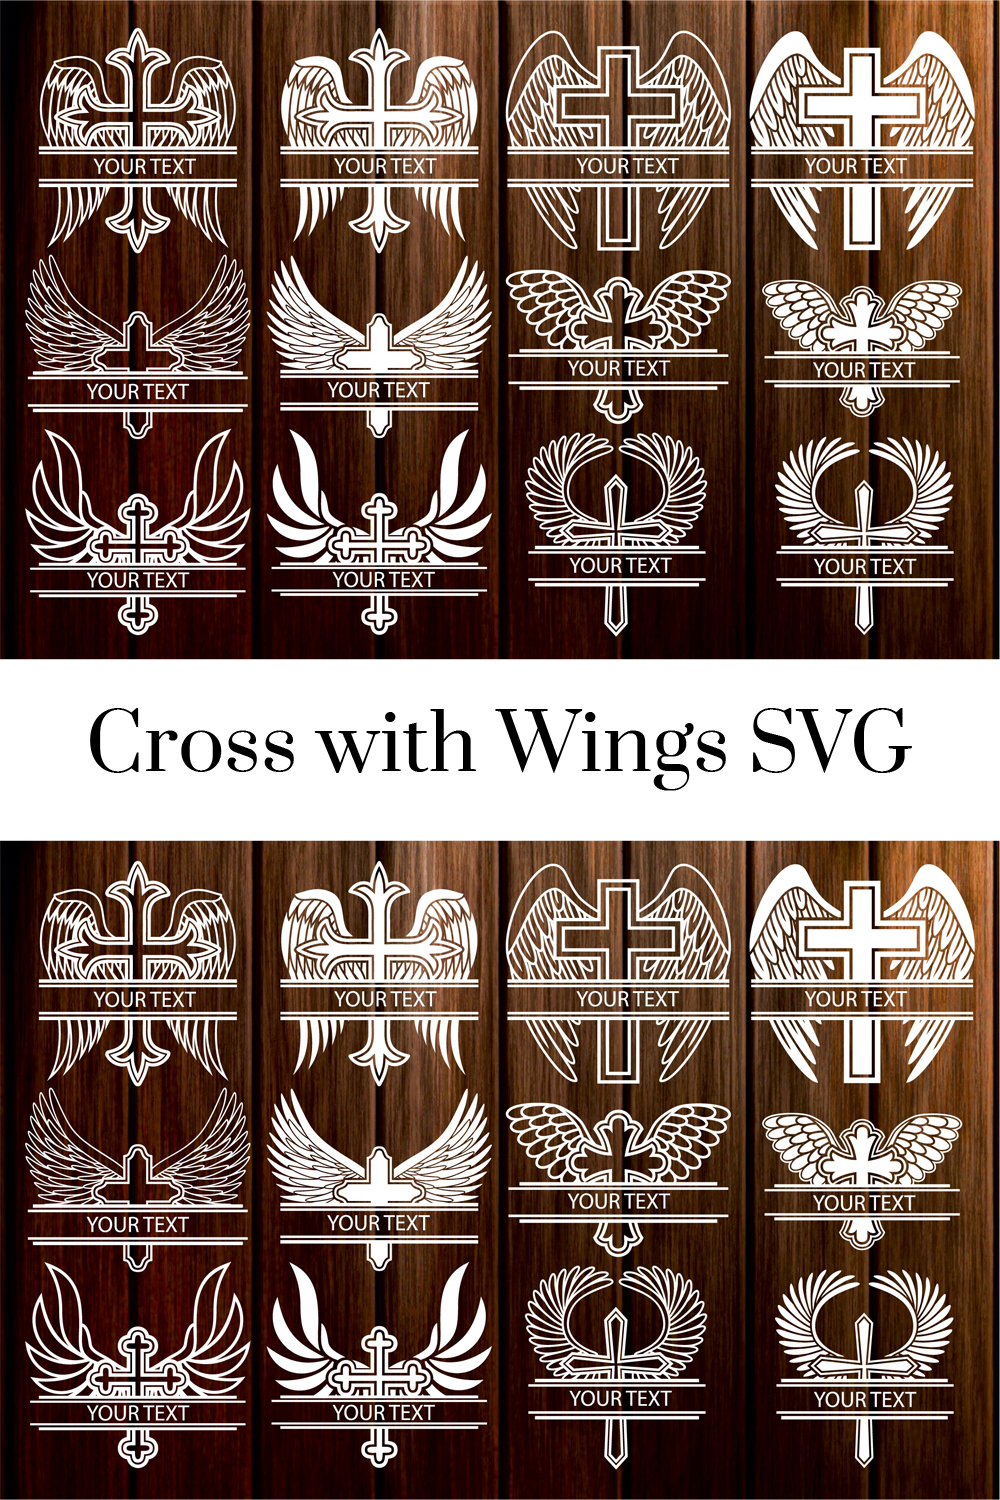 Crosses on a wooden background with angelic attributes.